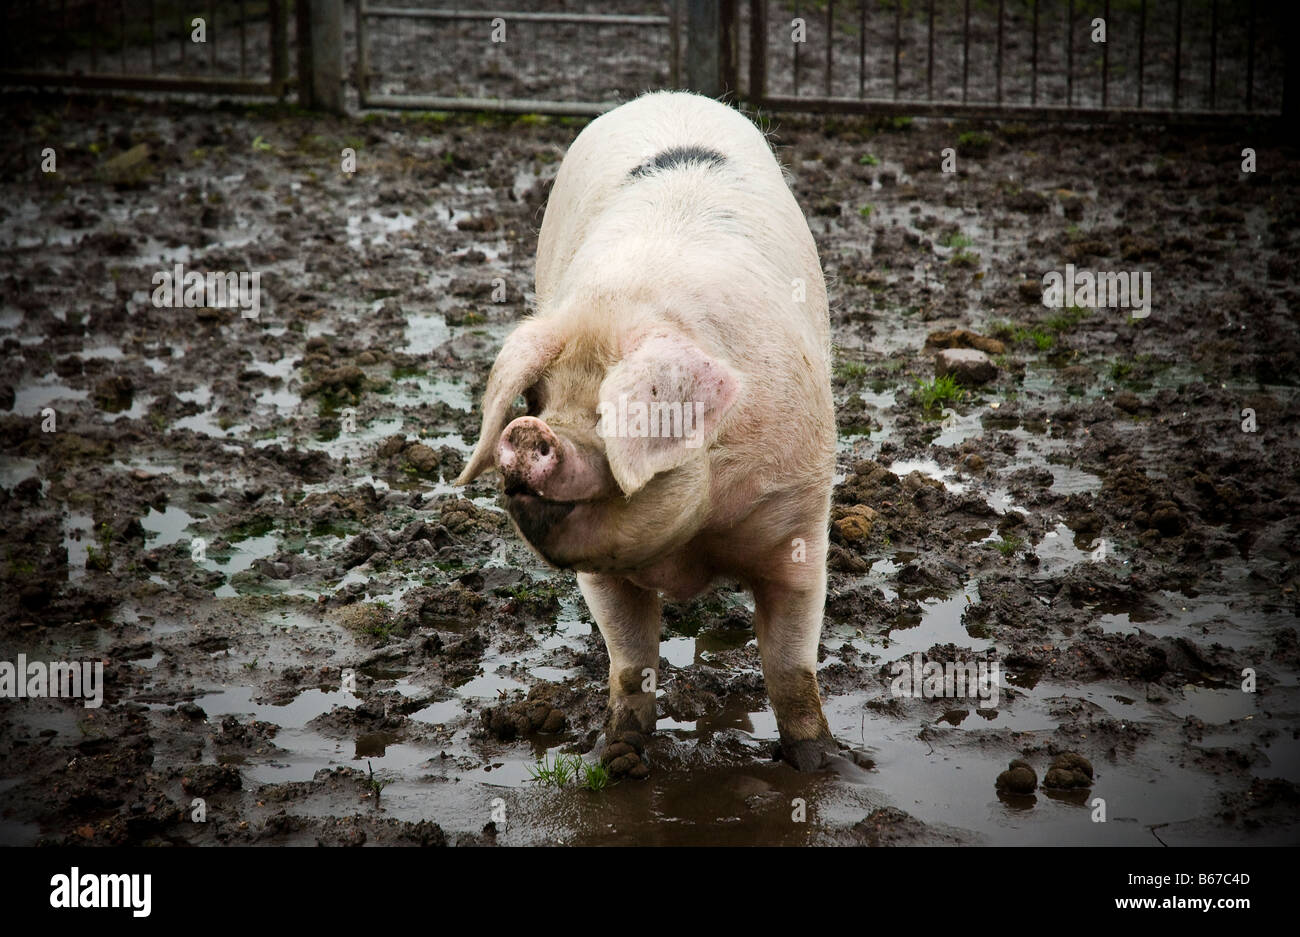 A fat pig in mud. Stock Photo